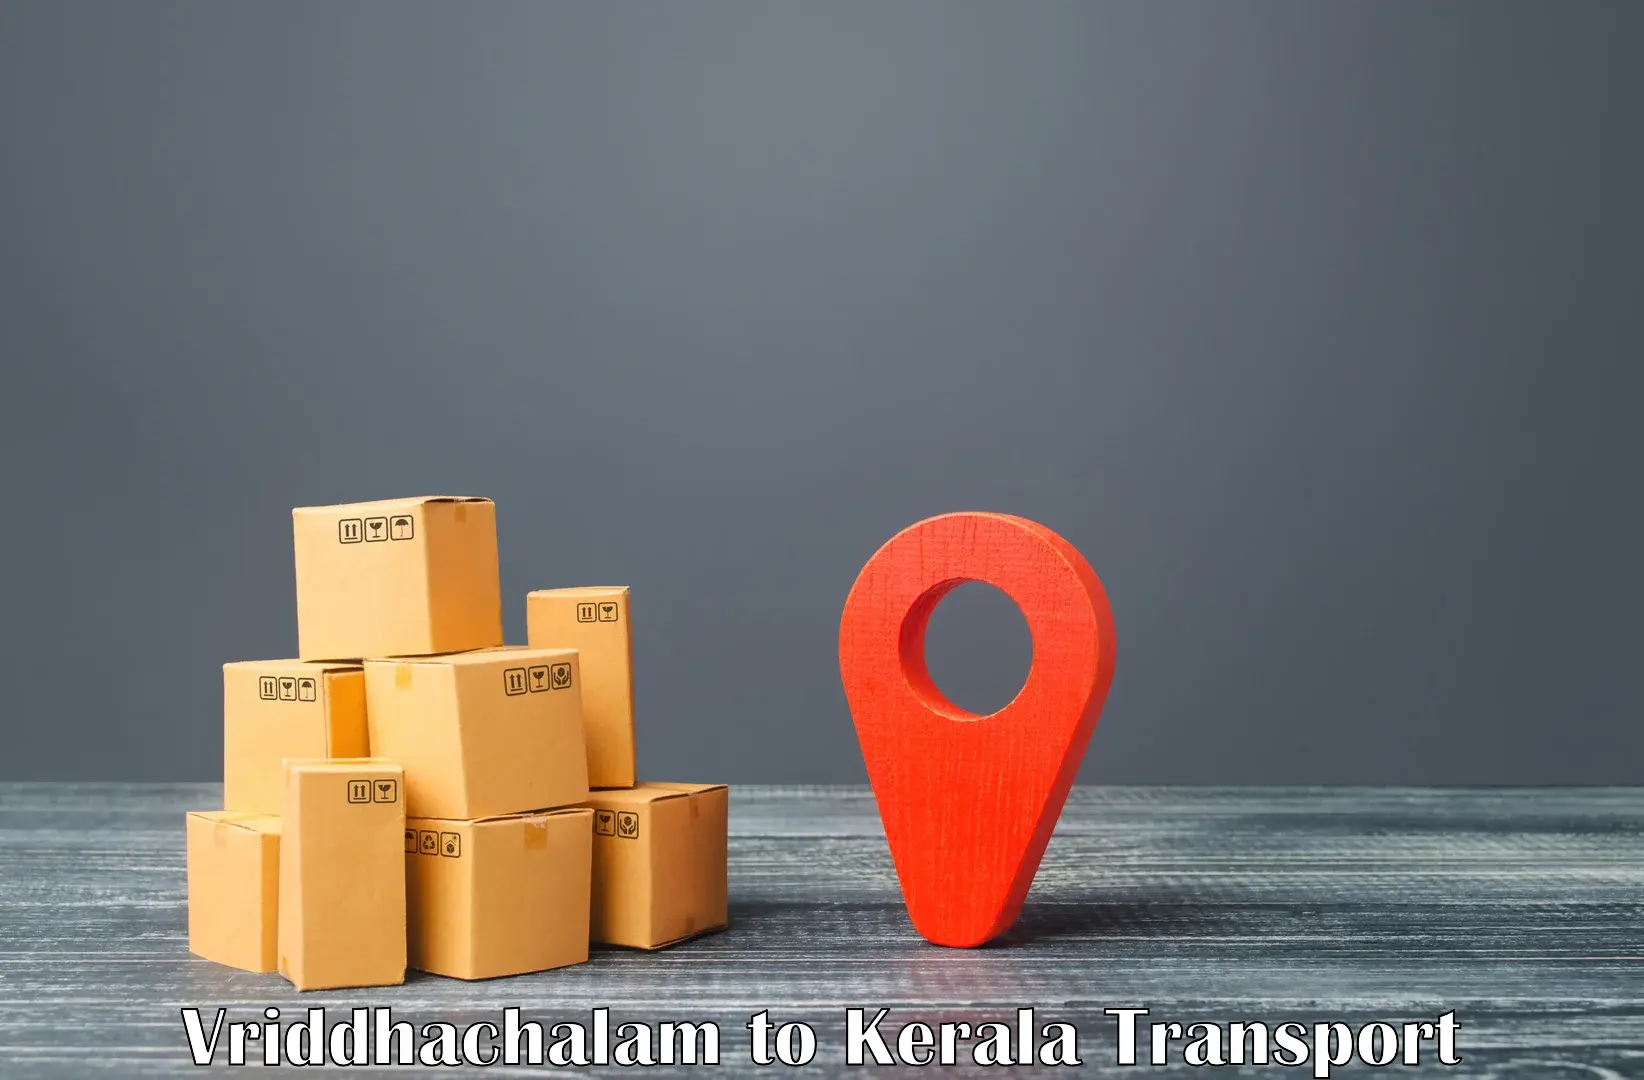 Nearby transport service Vriddhachalam to Palai